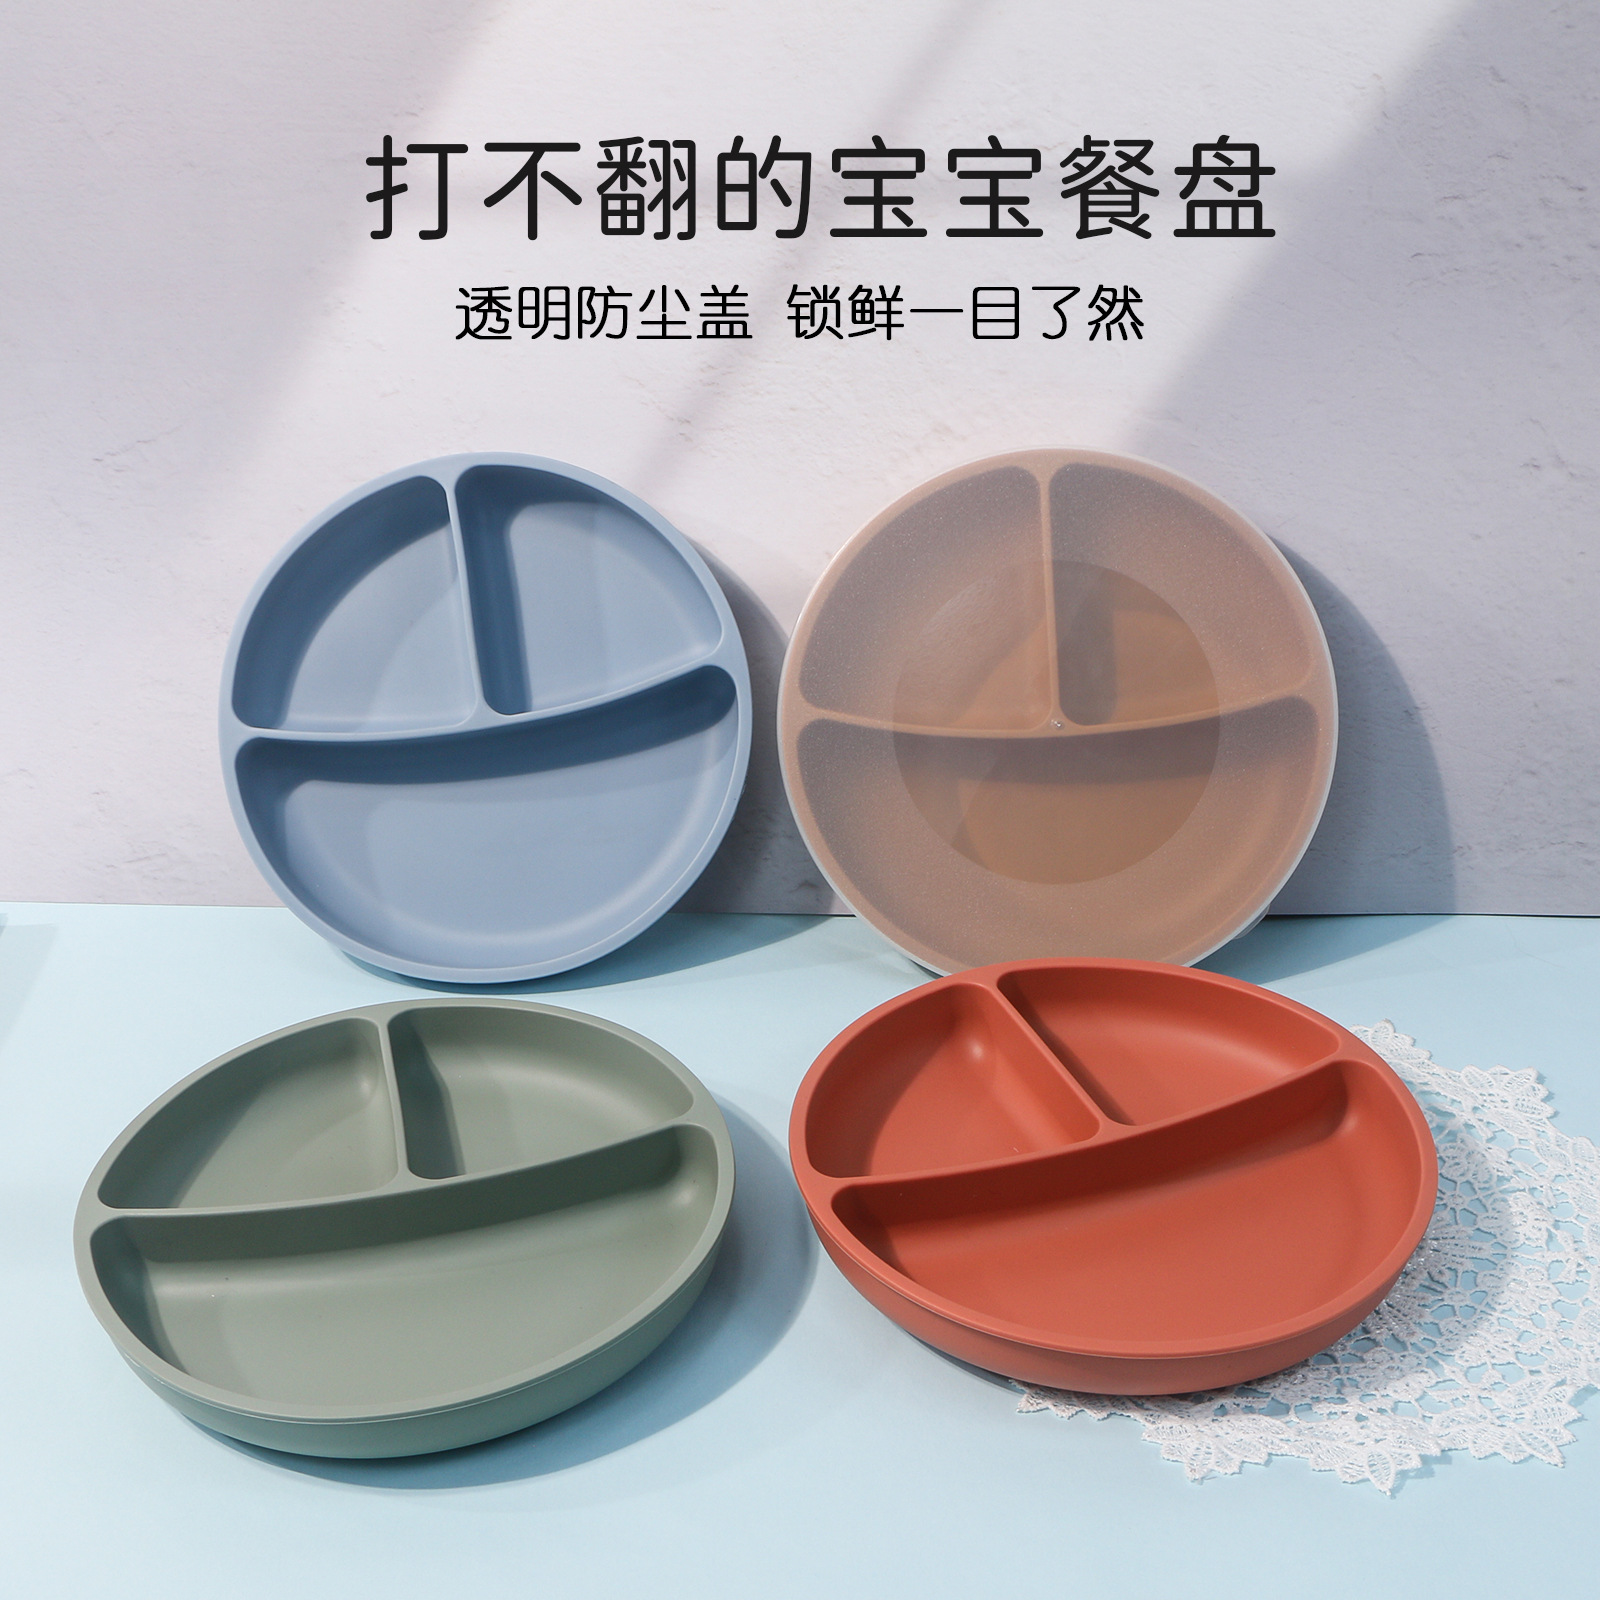 silicone tableware children‘s dinner plate separated dinner plate complementary food training tableware set snack bowl food grade platinum silicone